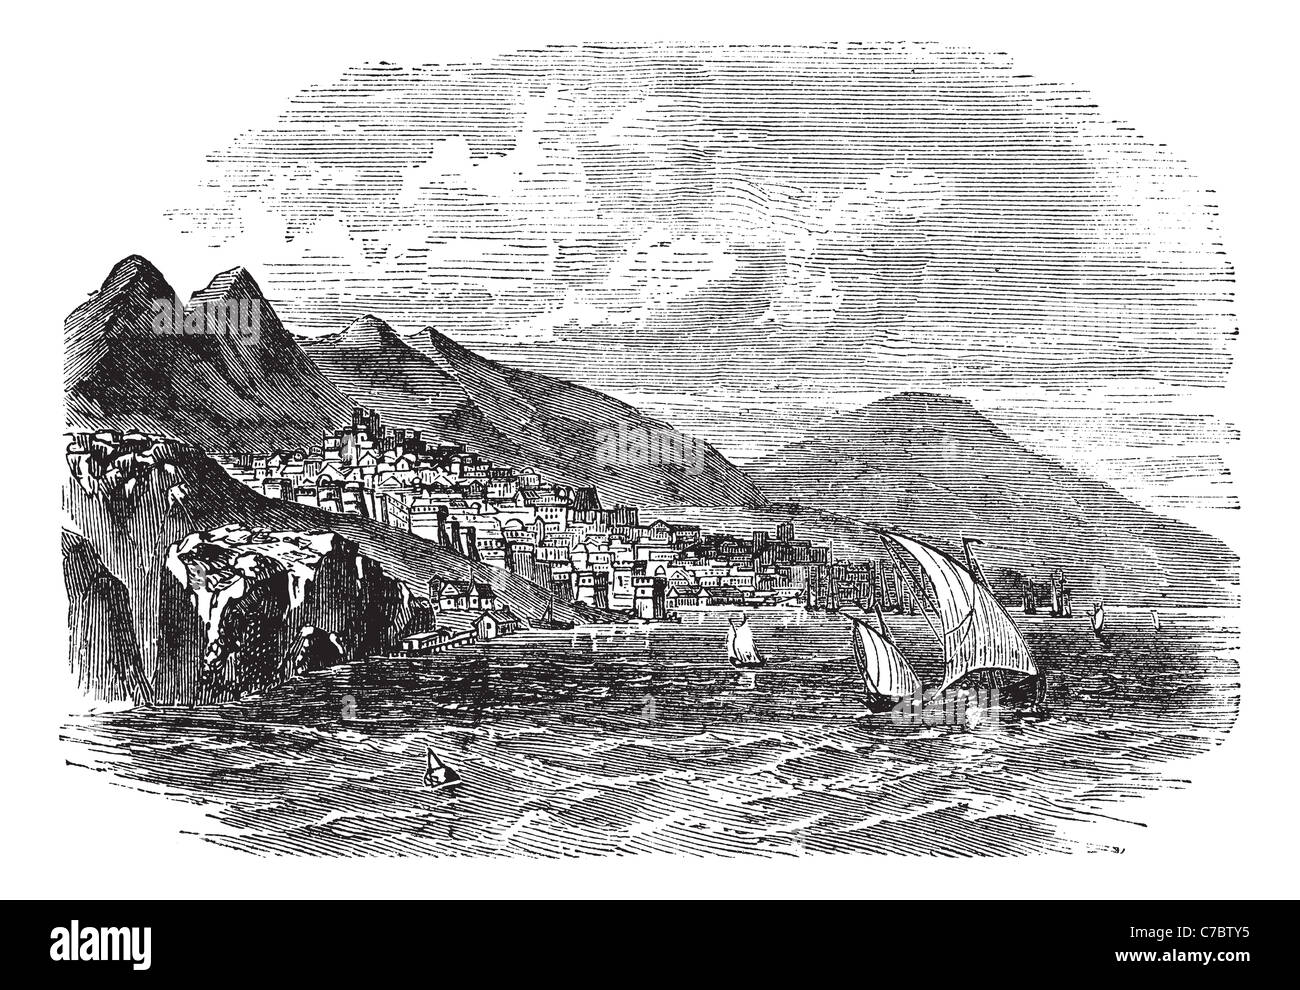 Feodosiya in Crimea, Ukraine, during the 1890s, vintage engraving. Old engraved illustration of Feodosiya with lake in front. Stock Photo